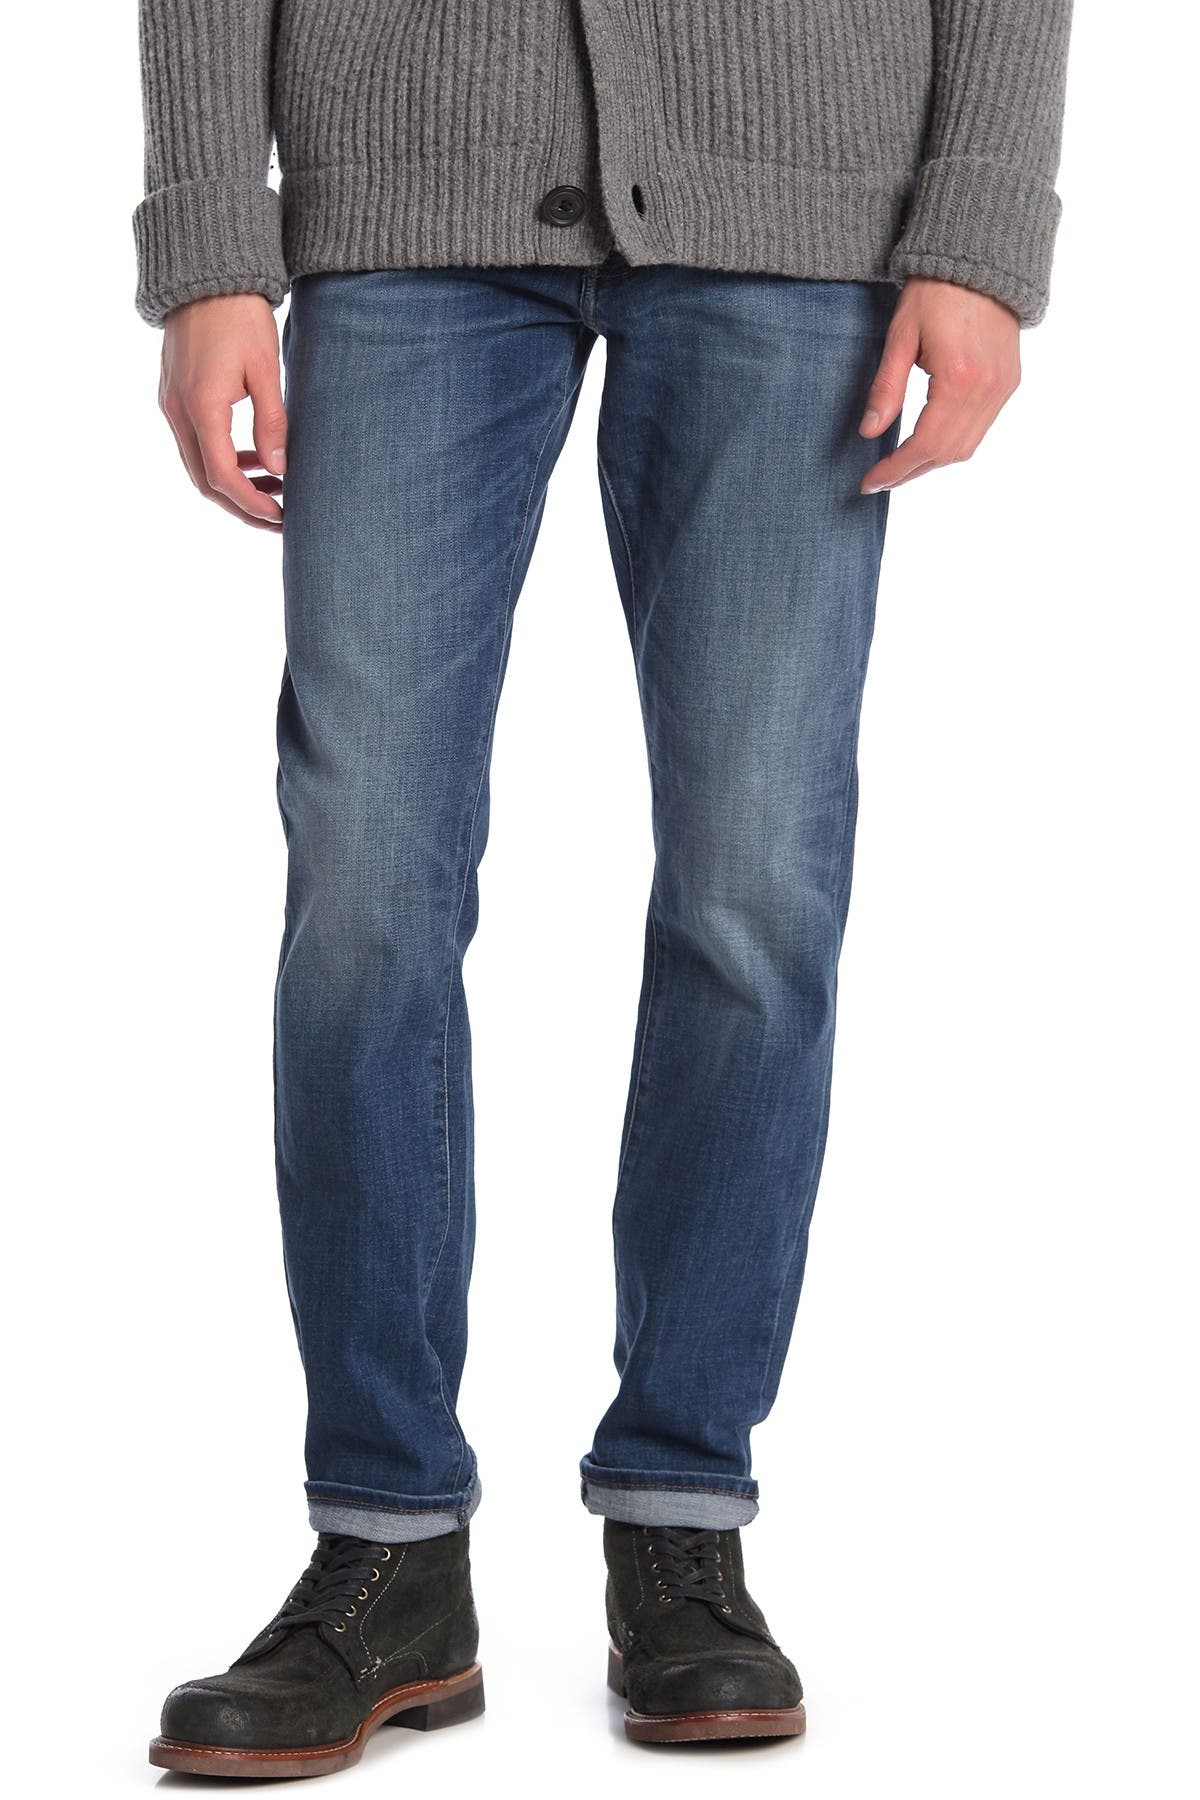 lucky 121 slim jeans